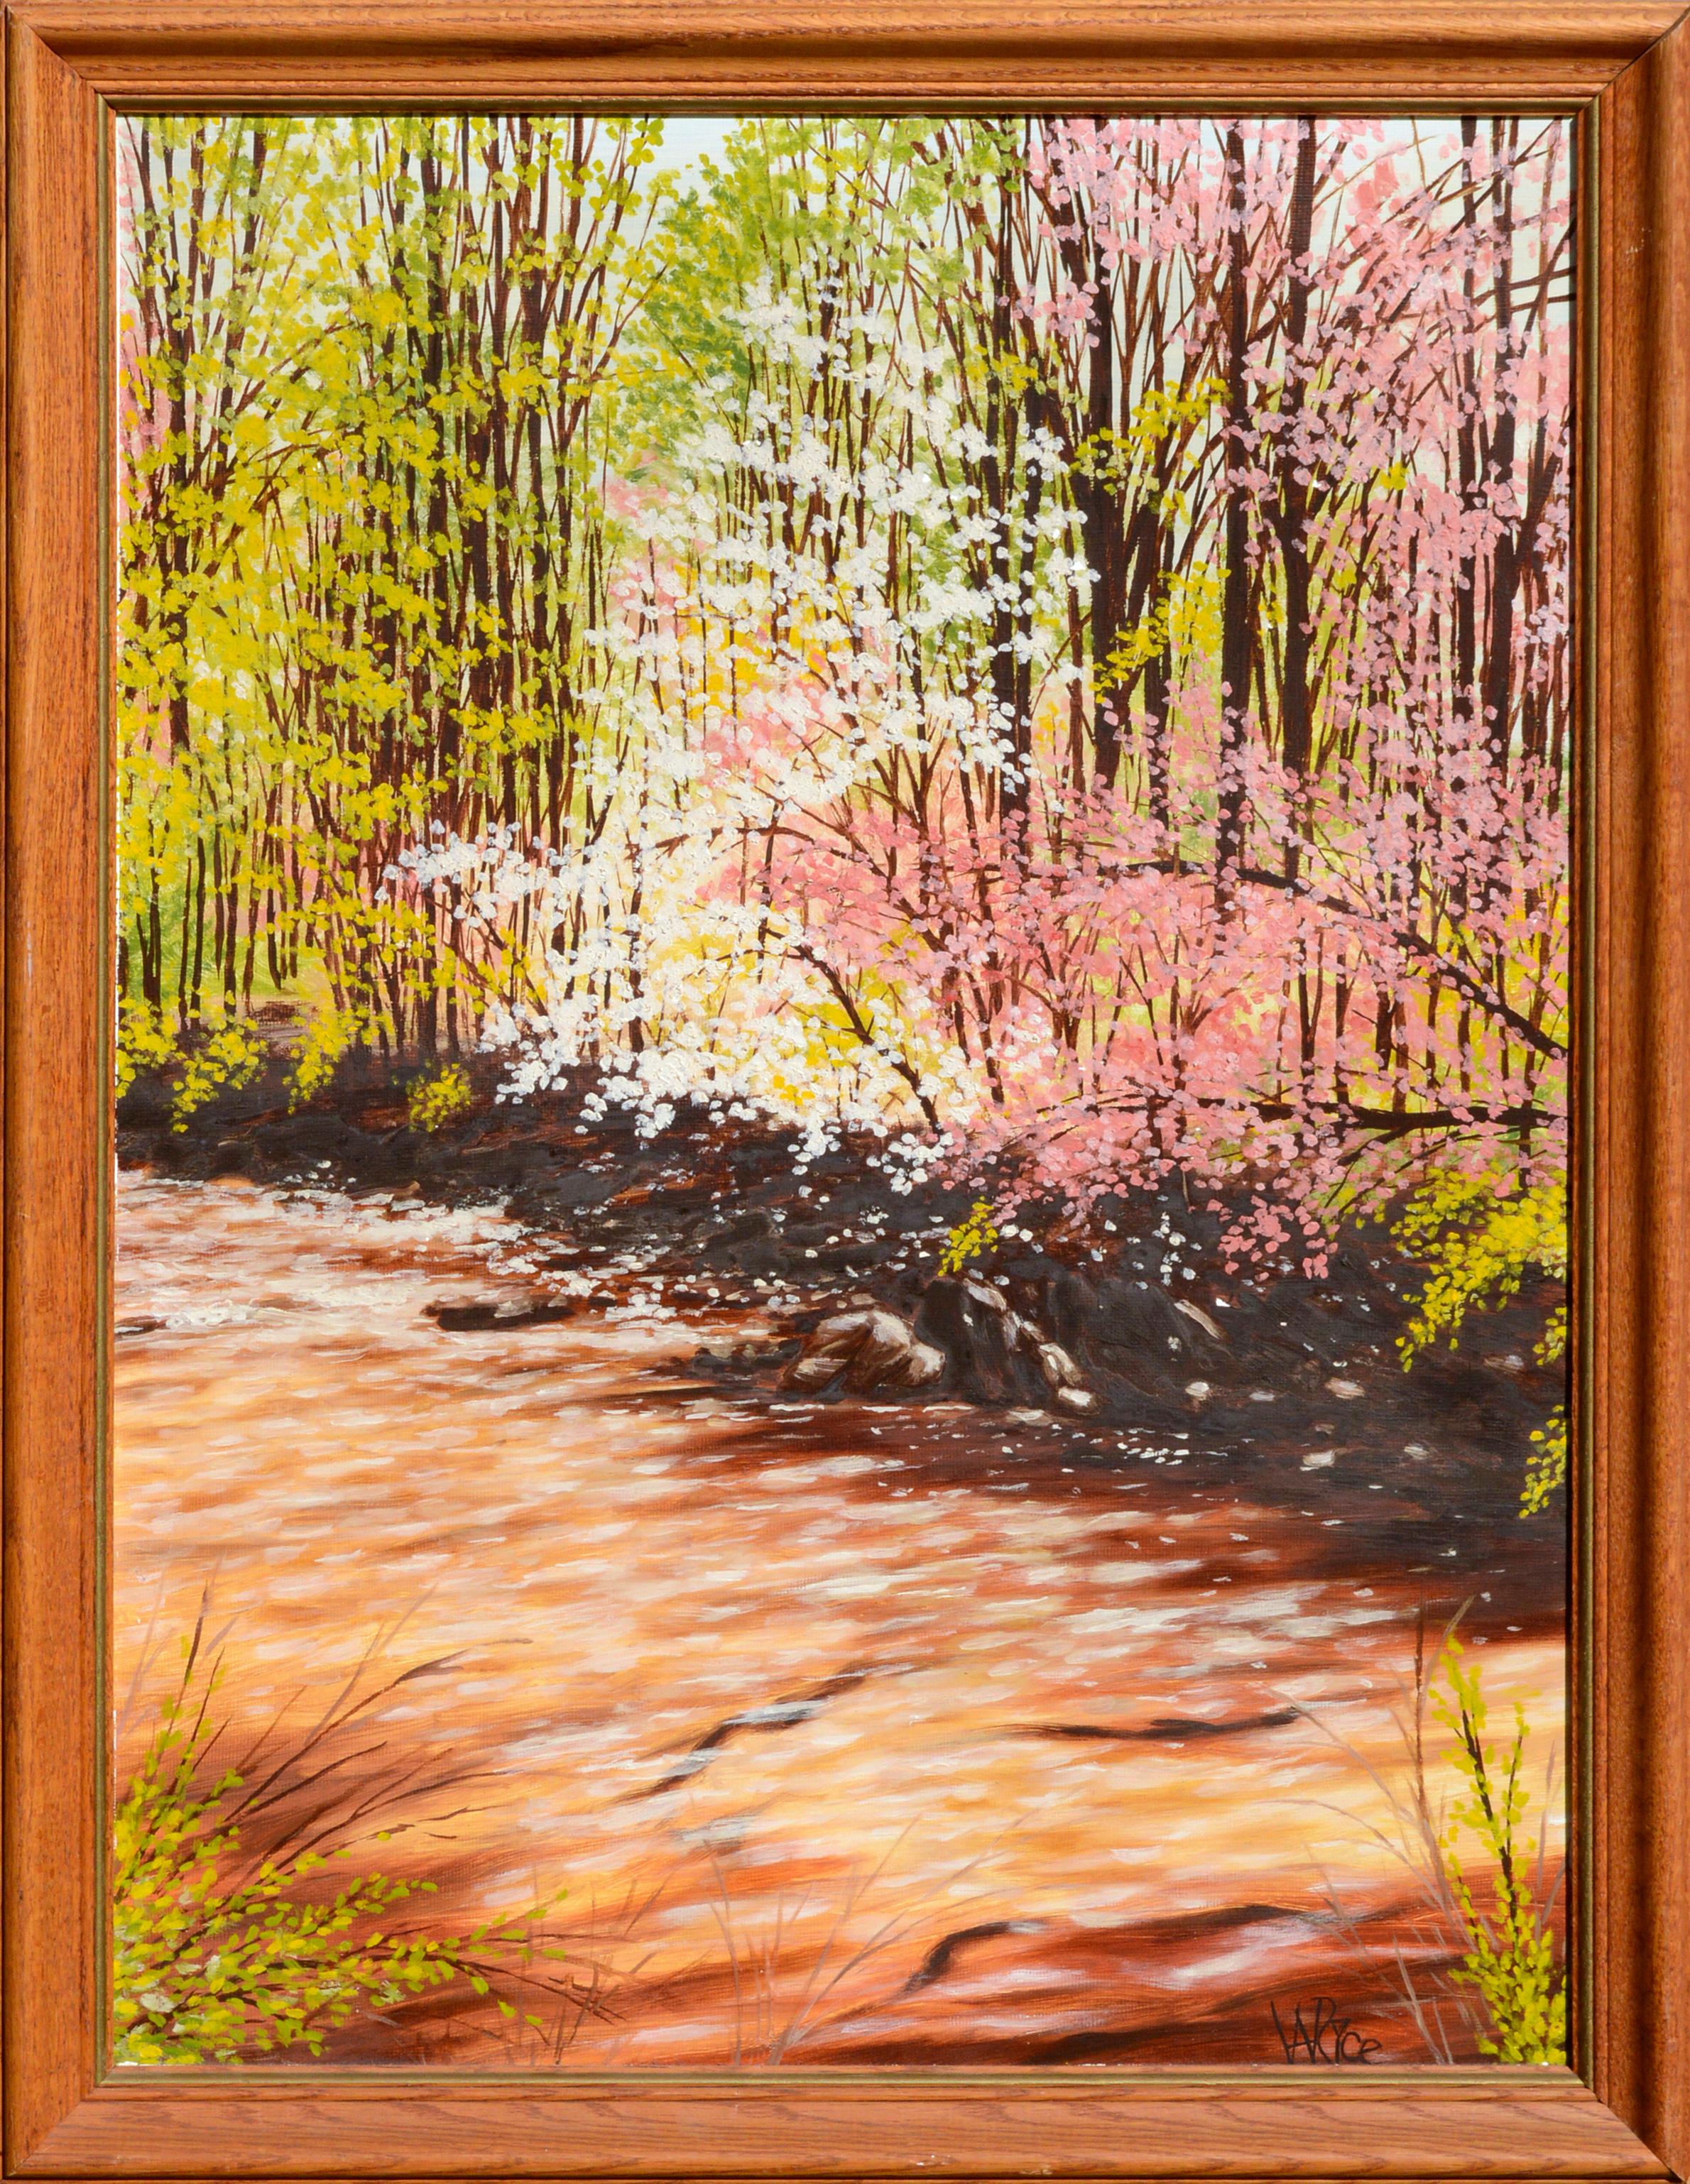 W. A. Rice Landscape Painting - Dogwoods in Bloom - Landscape